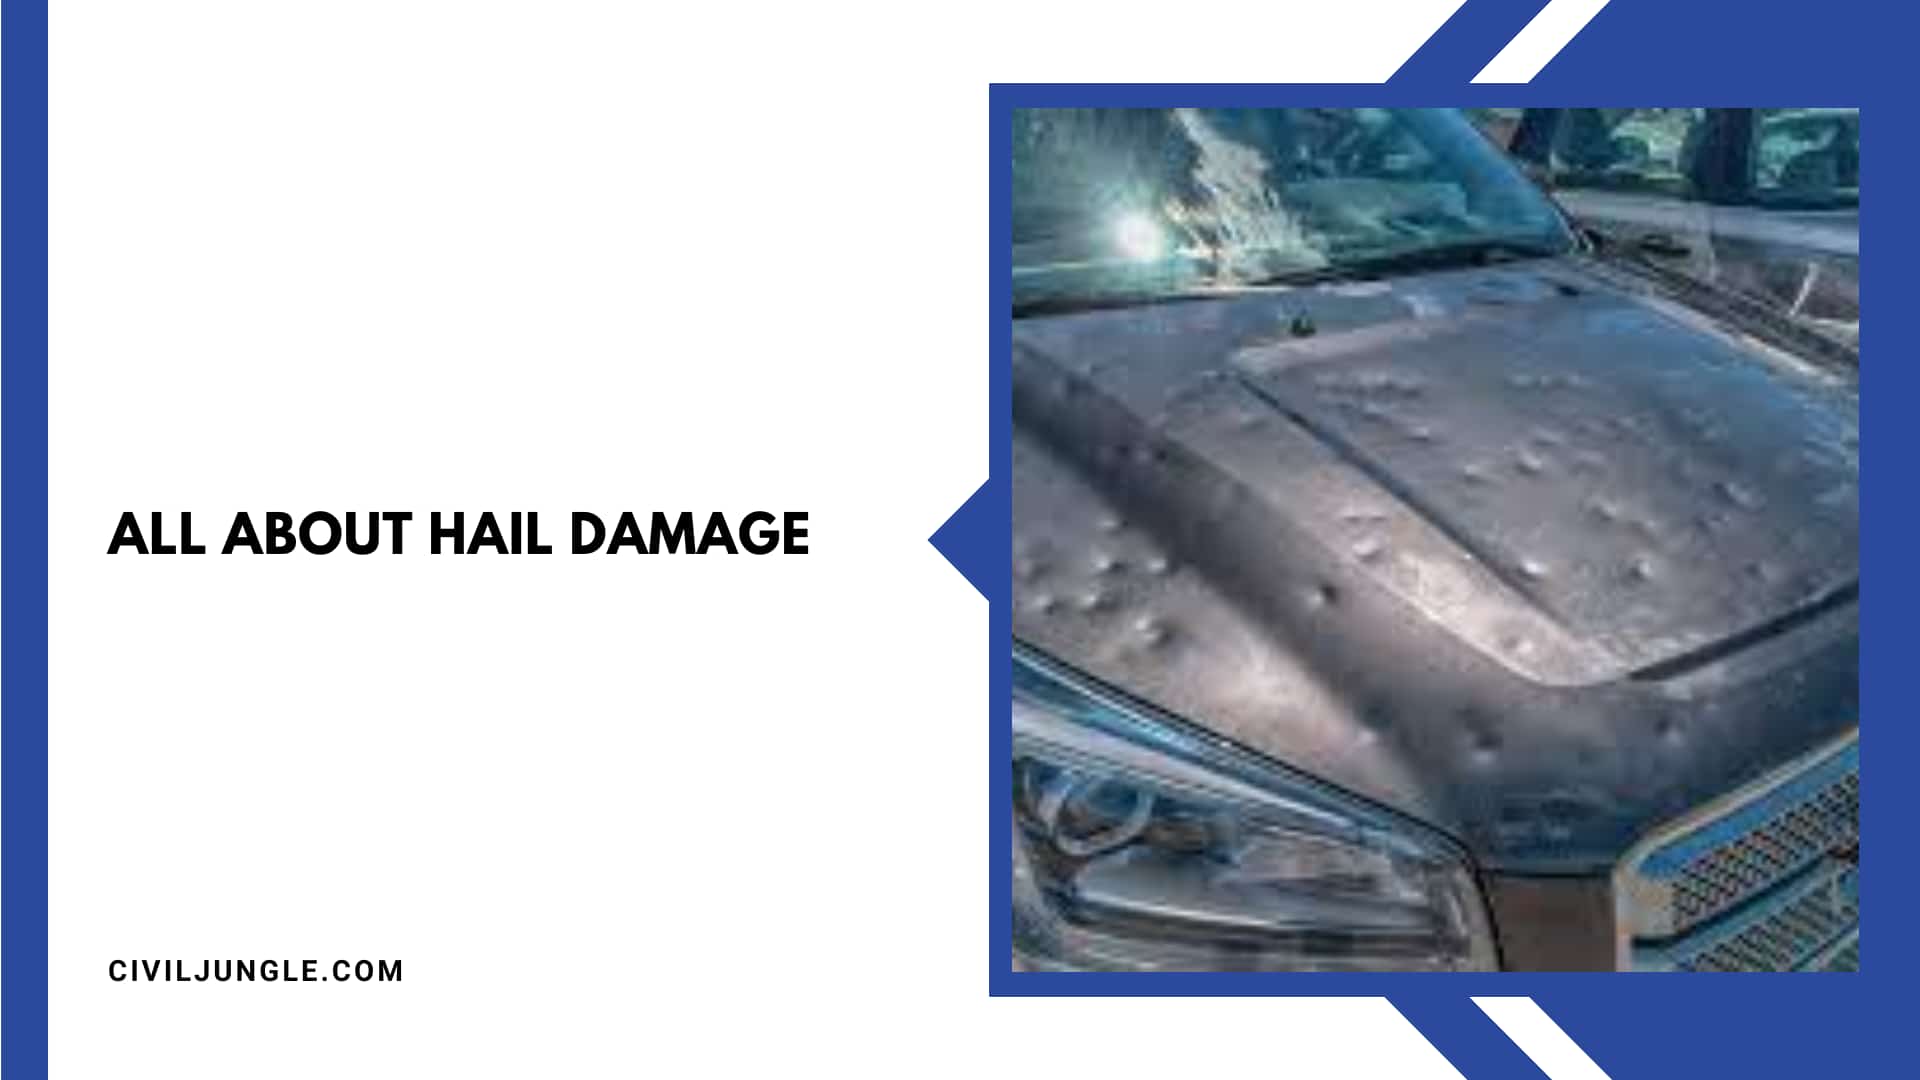 All About Hail Damage